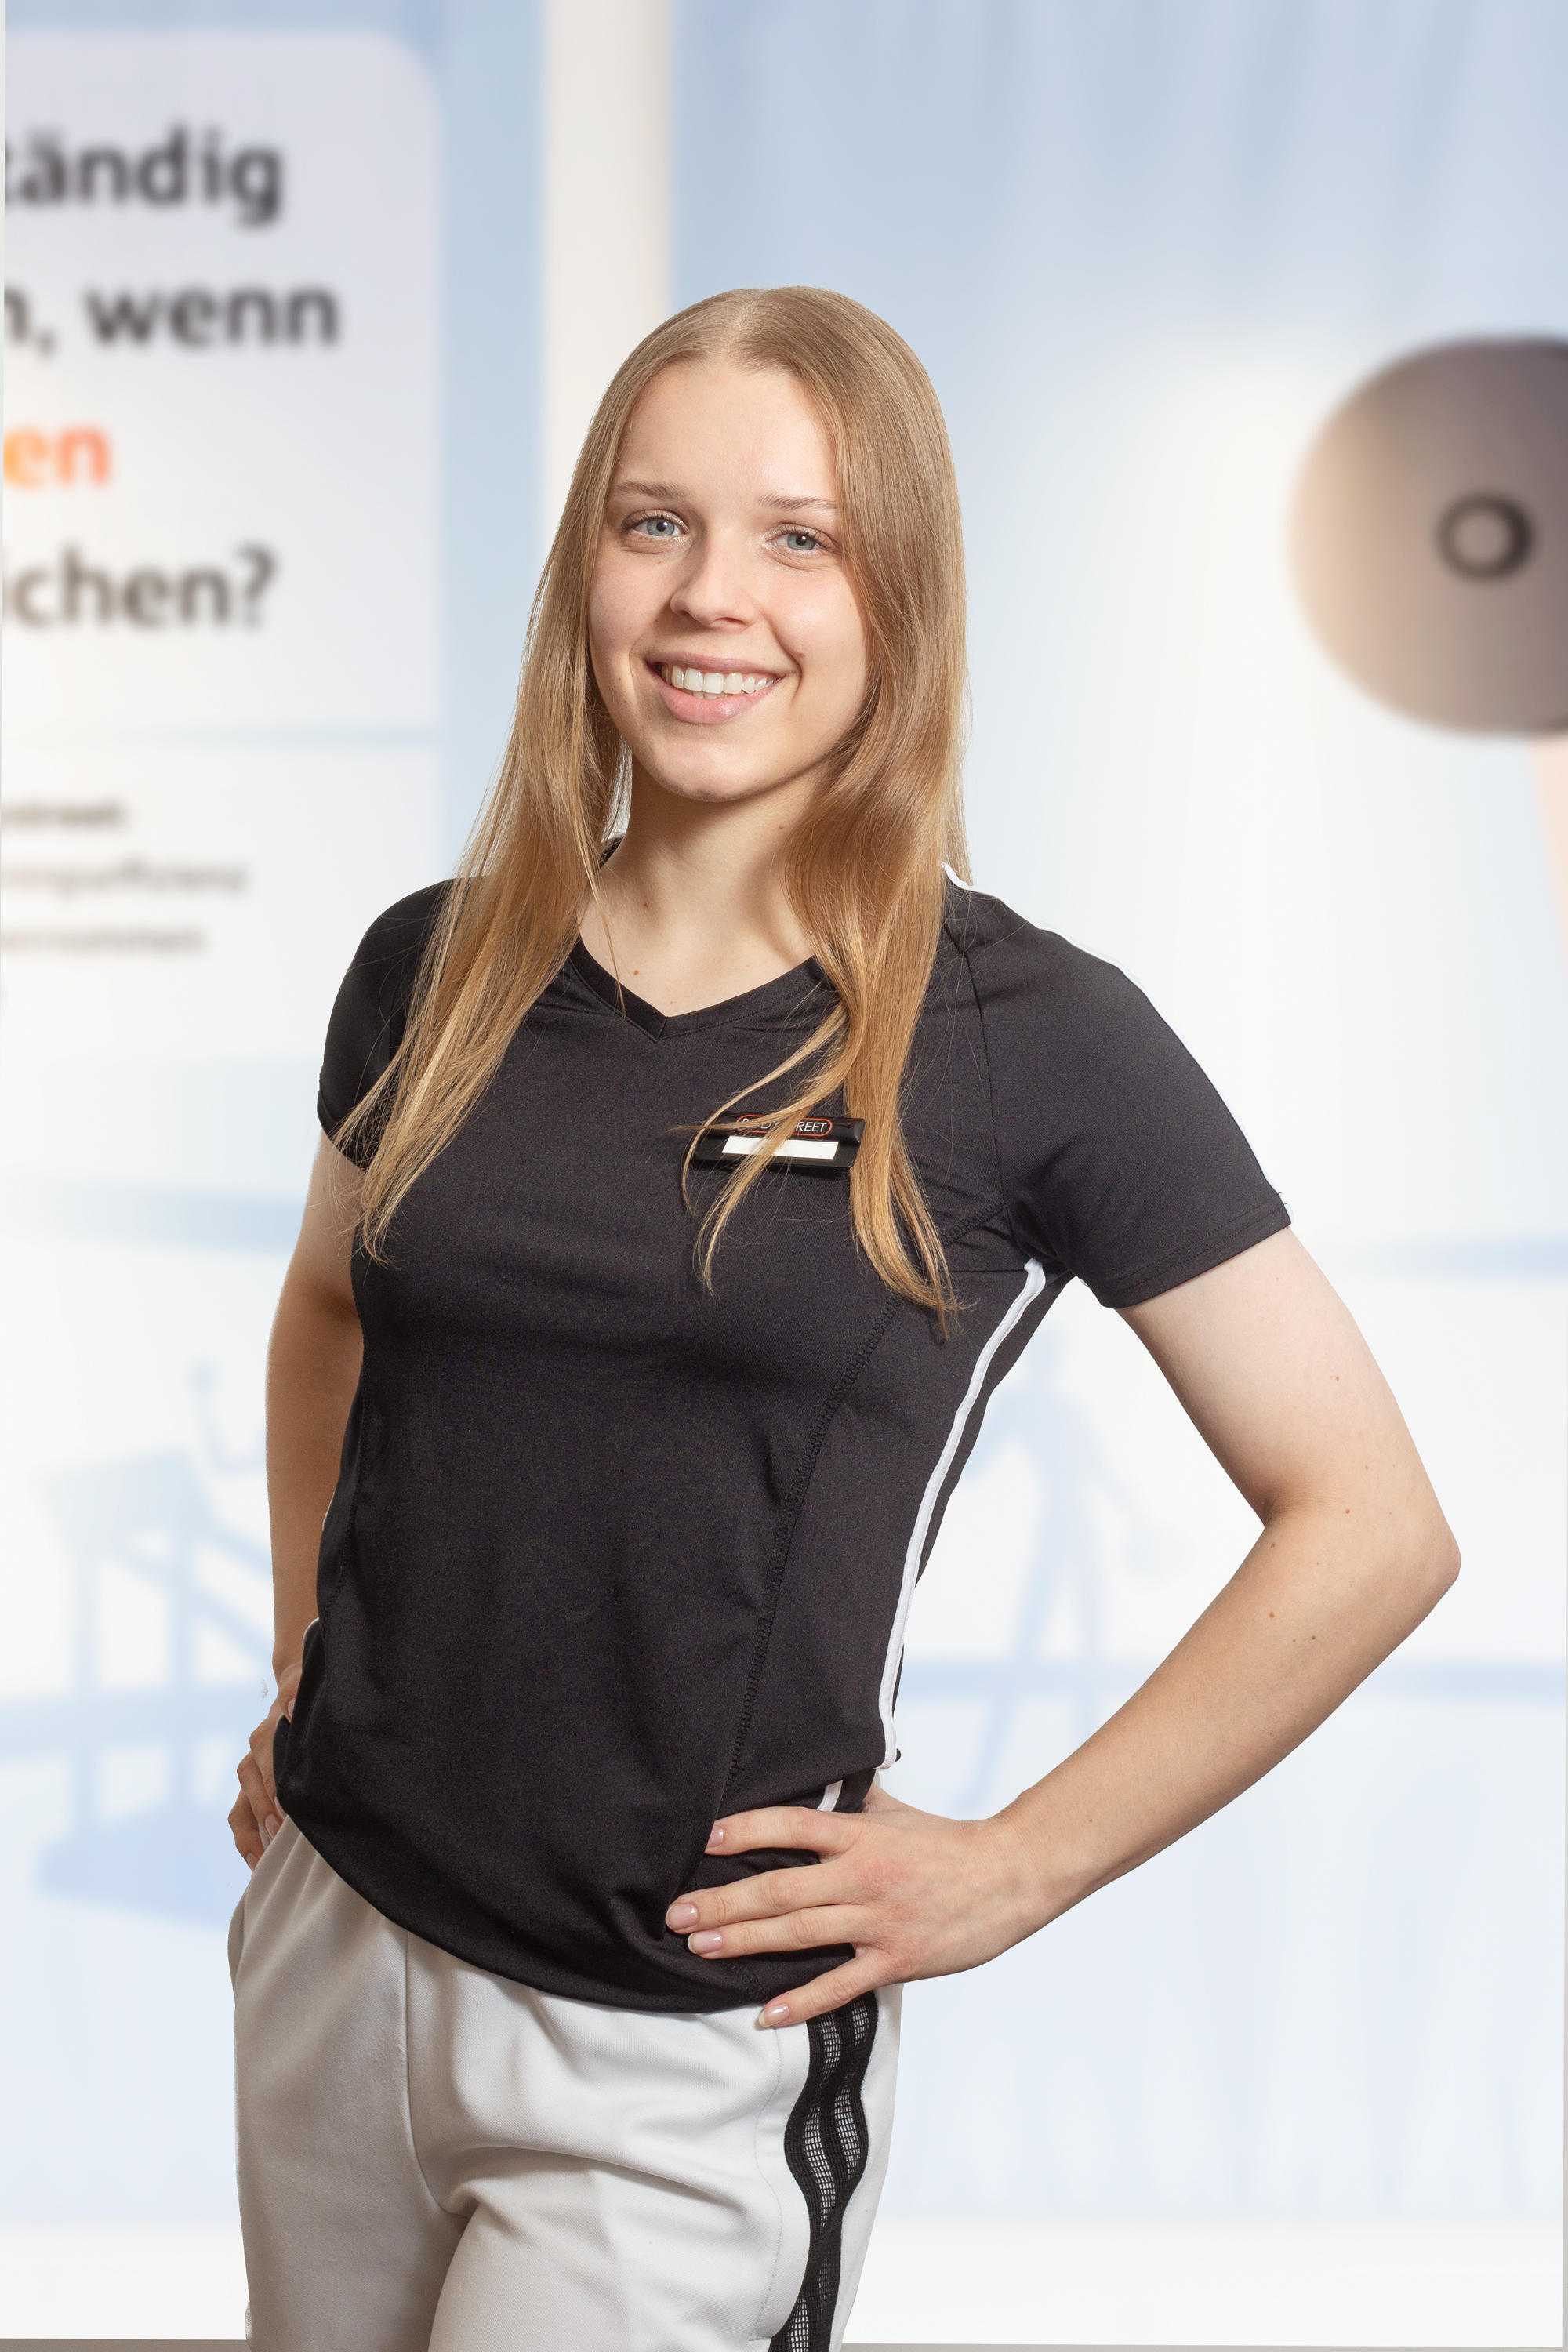 EMS Trainerin Pia Hille - Bodystreet Instructor